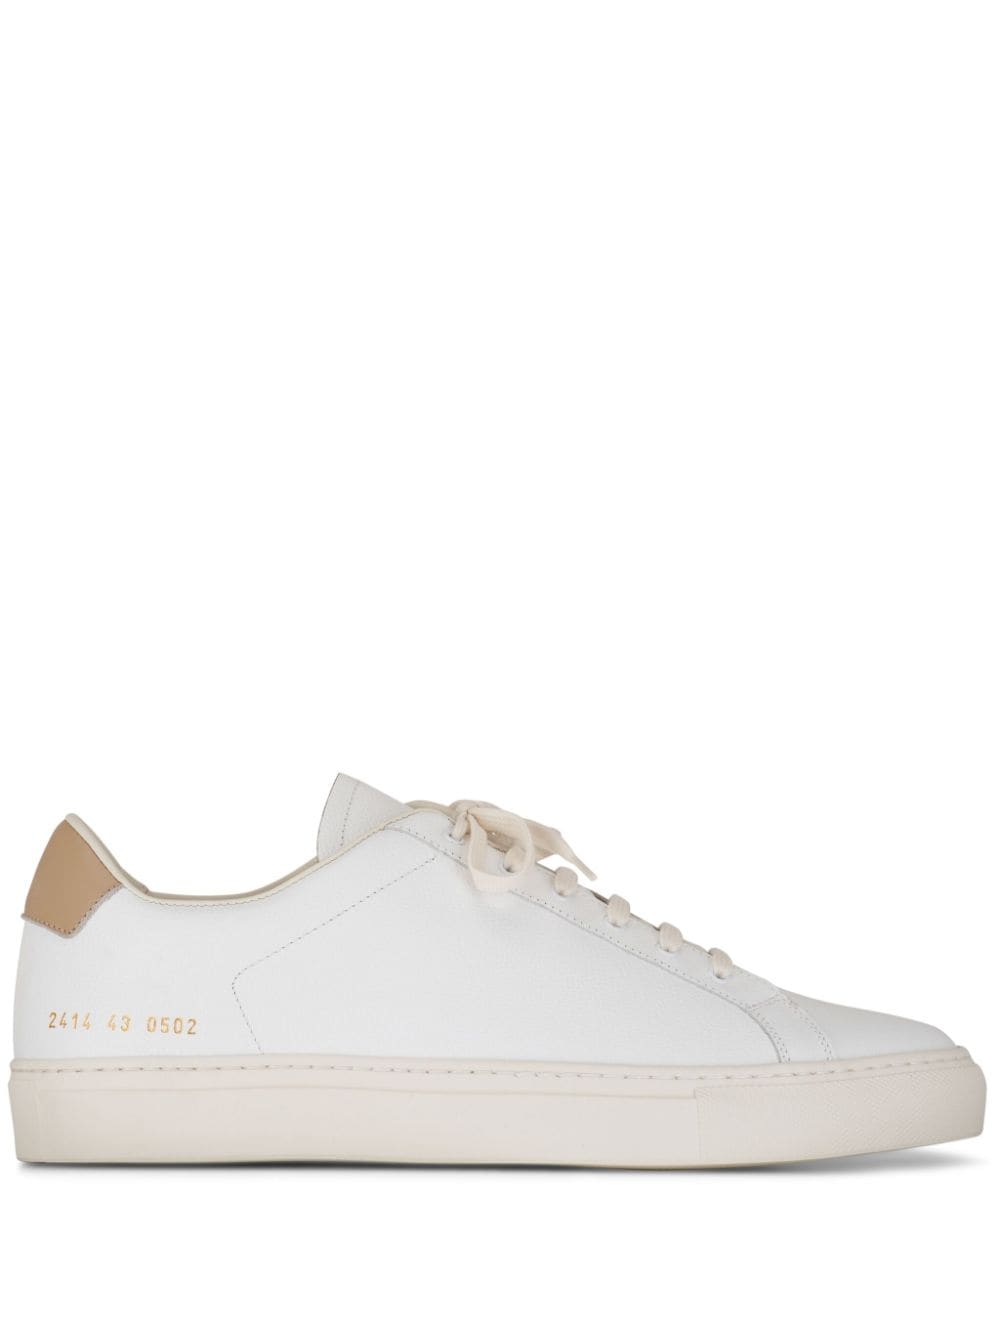 Common Projects leather lace-up sneakers - White von Common Projects